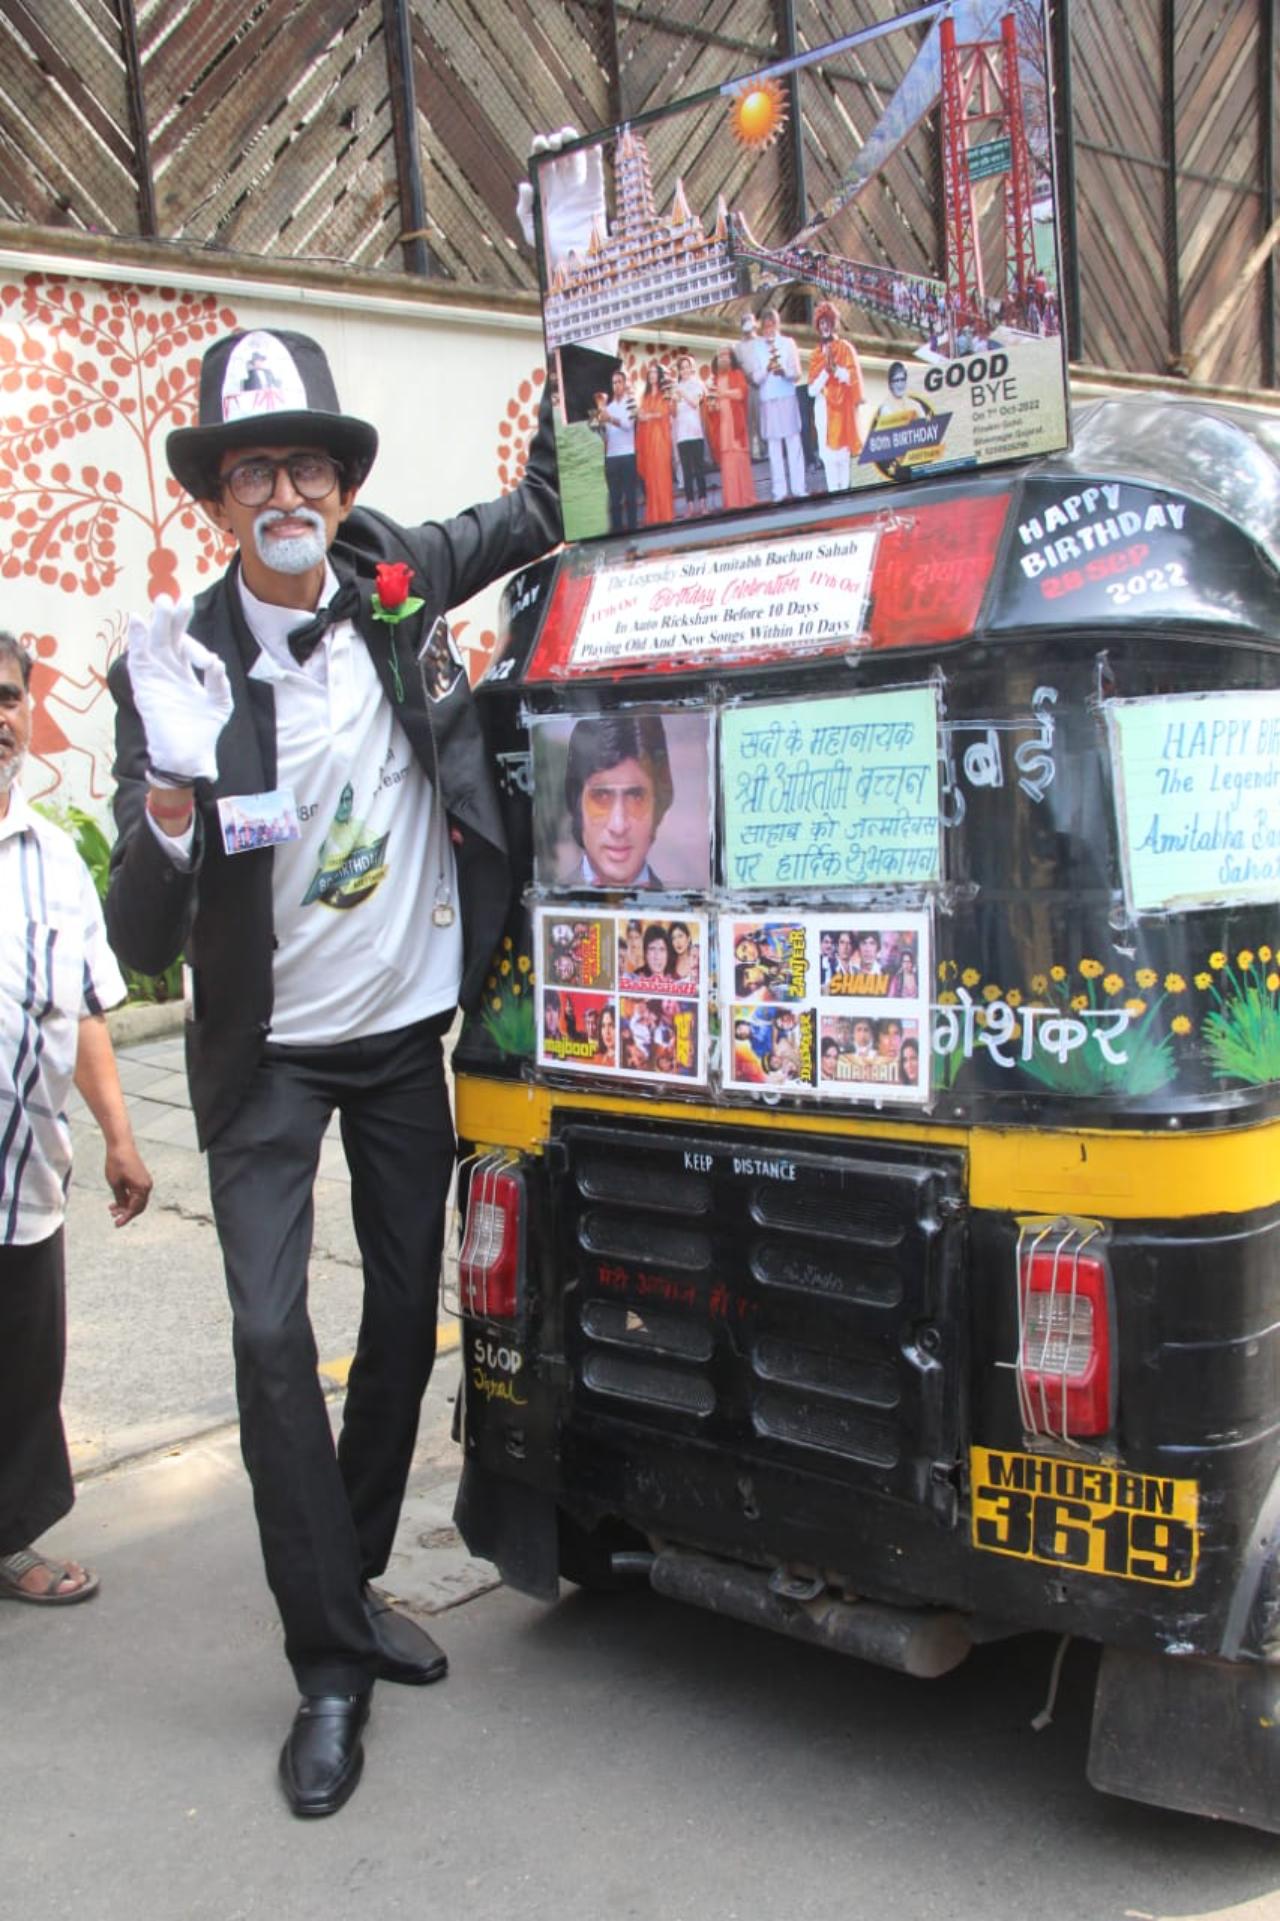 Some also dressed up as Amitabh Bachchan as a tribute to the star. Several also got handmade artwork for the actor